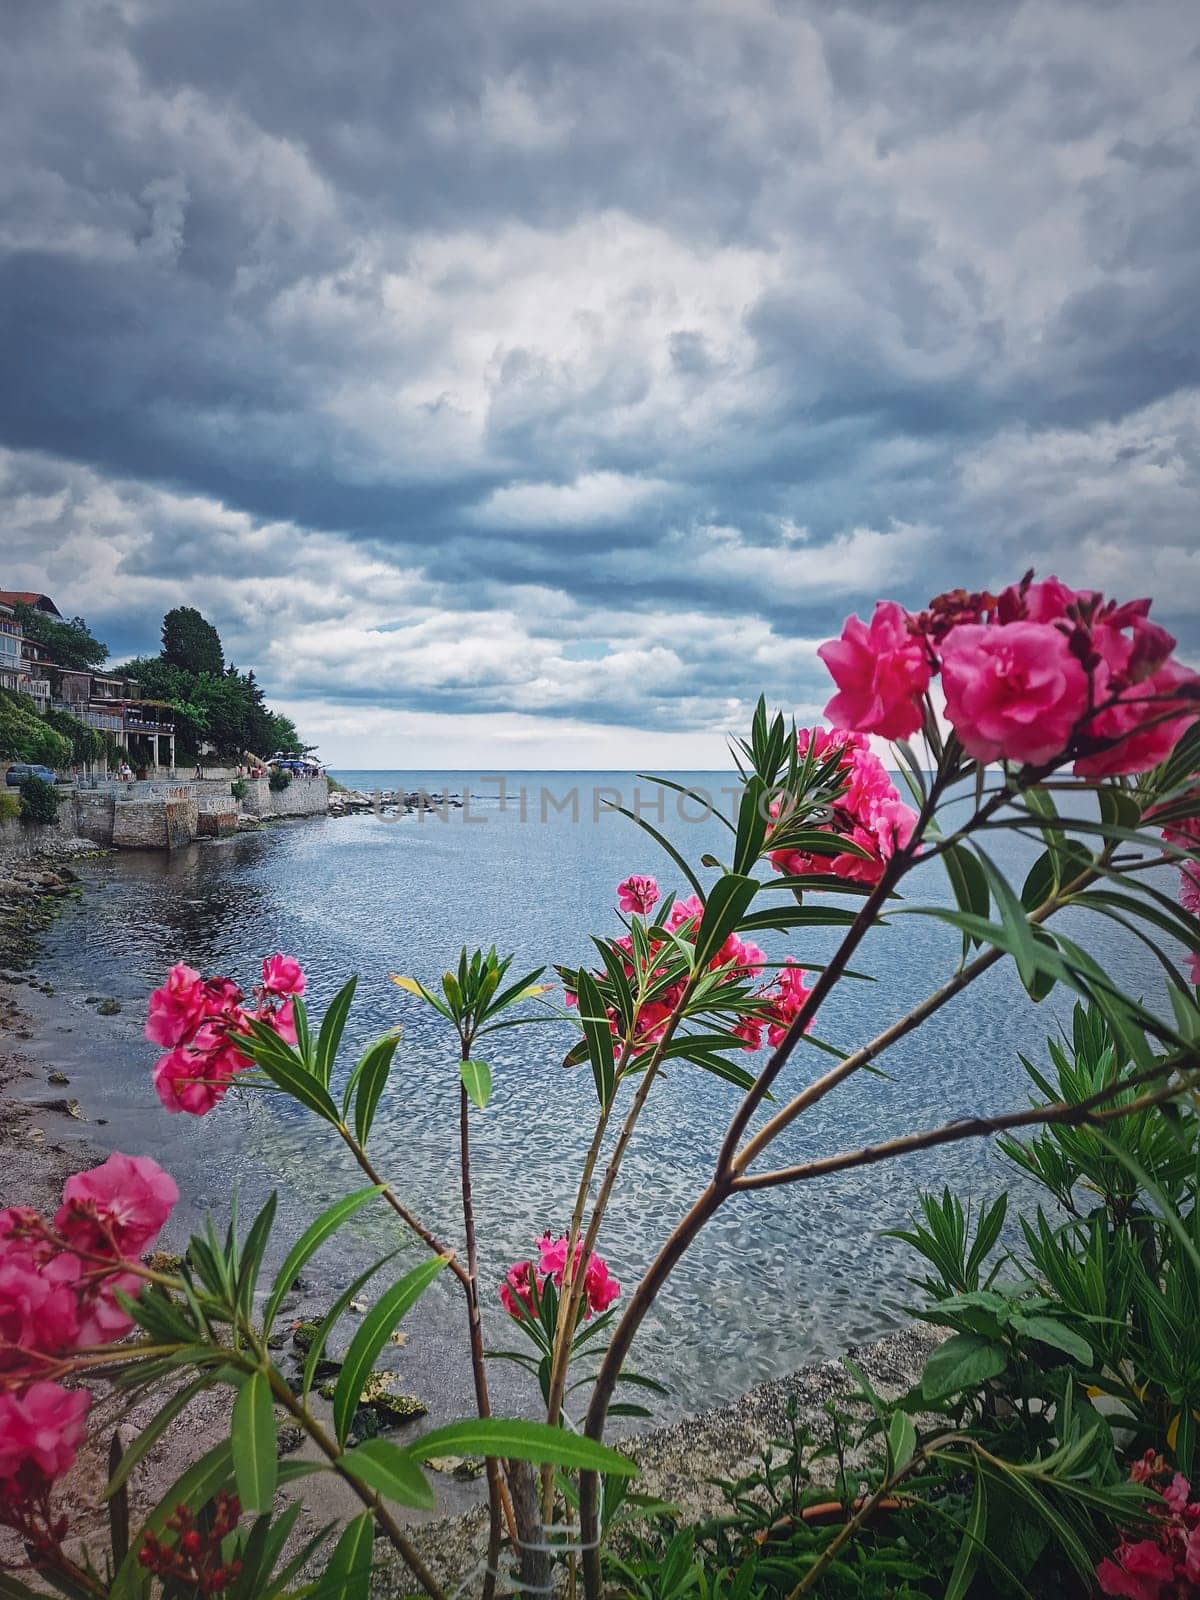 Pink Nerium Oleander flowers on the bulgarian coastline with a view to the Black Sea. The old town of Nessebar, Burgas Region, Bulgaria by psychoshadow